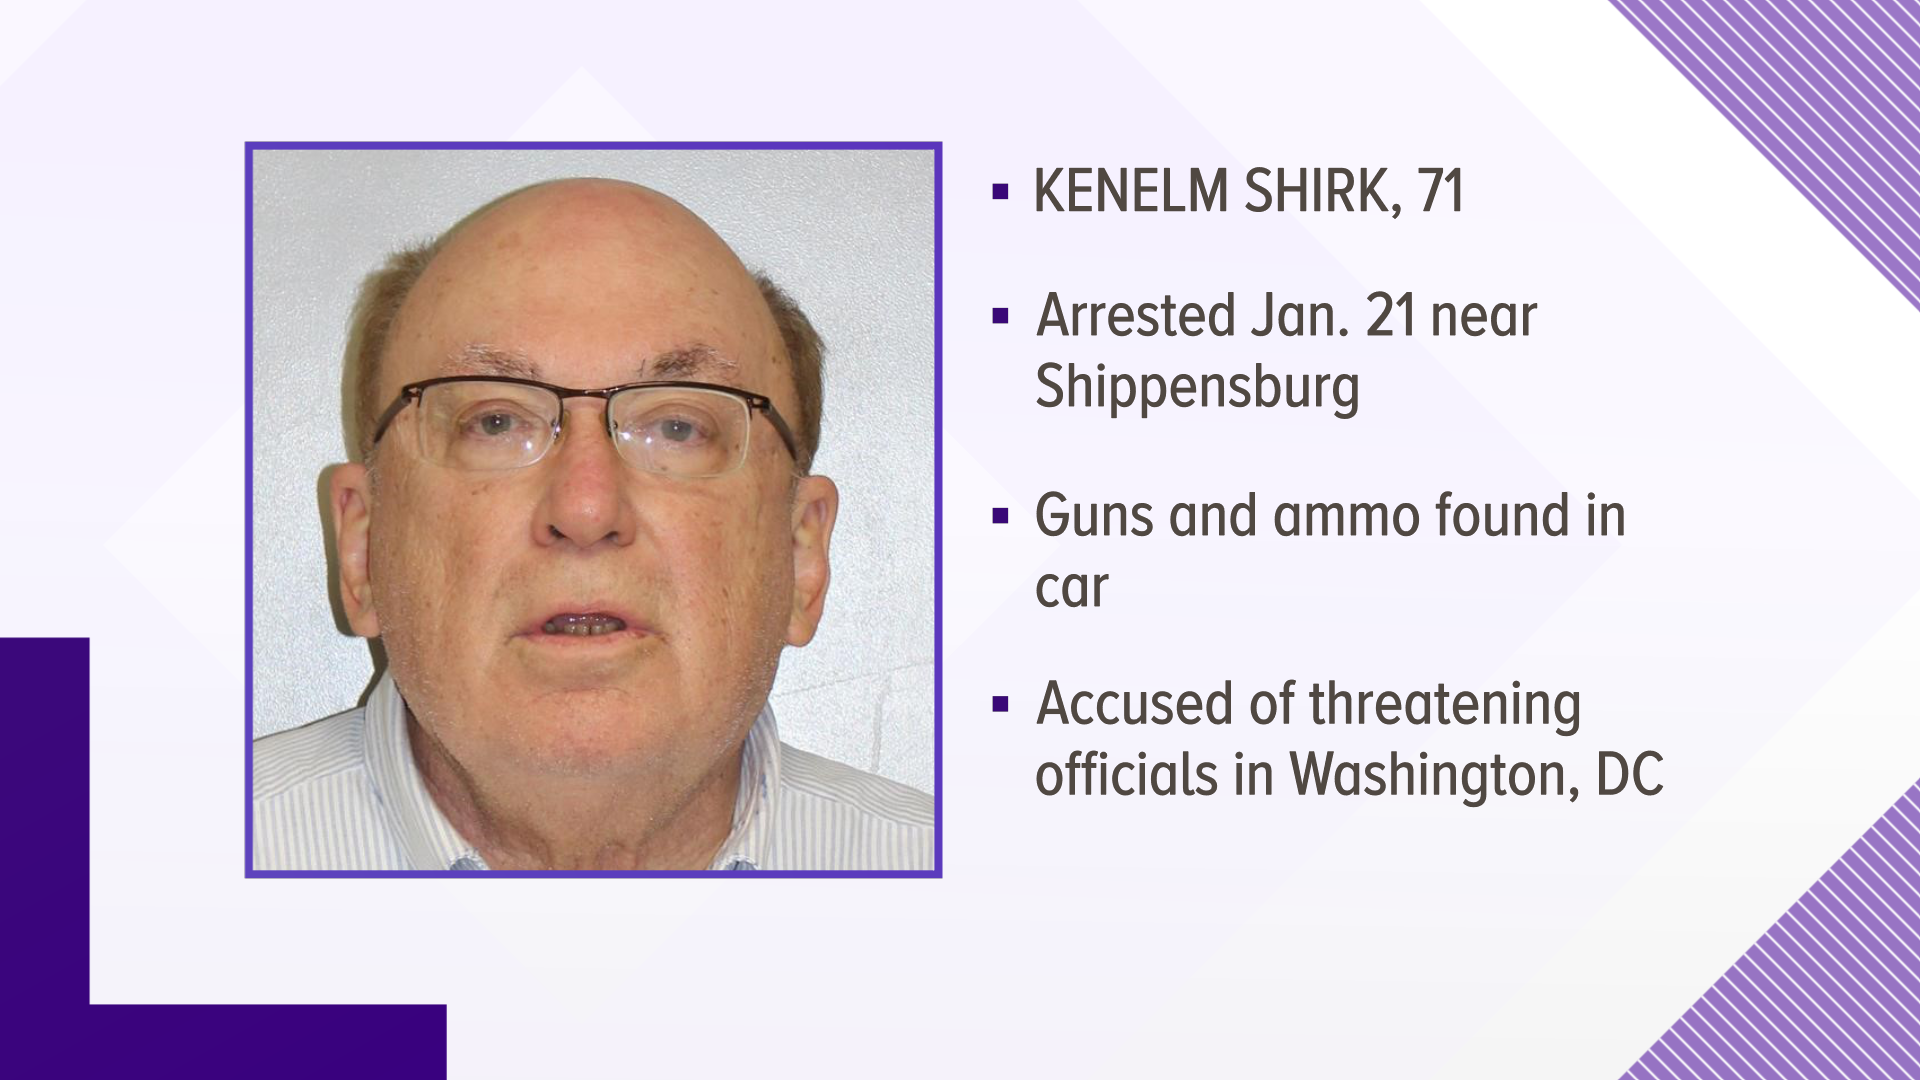 He allegedly threatened to kill democratic members of the US Senate in the days after the Capitol insurrection.